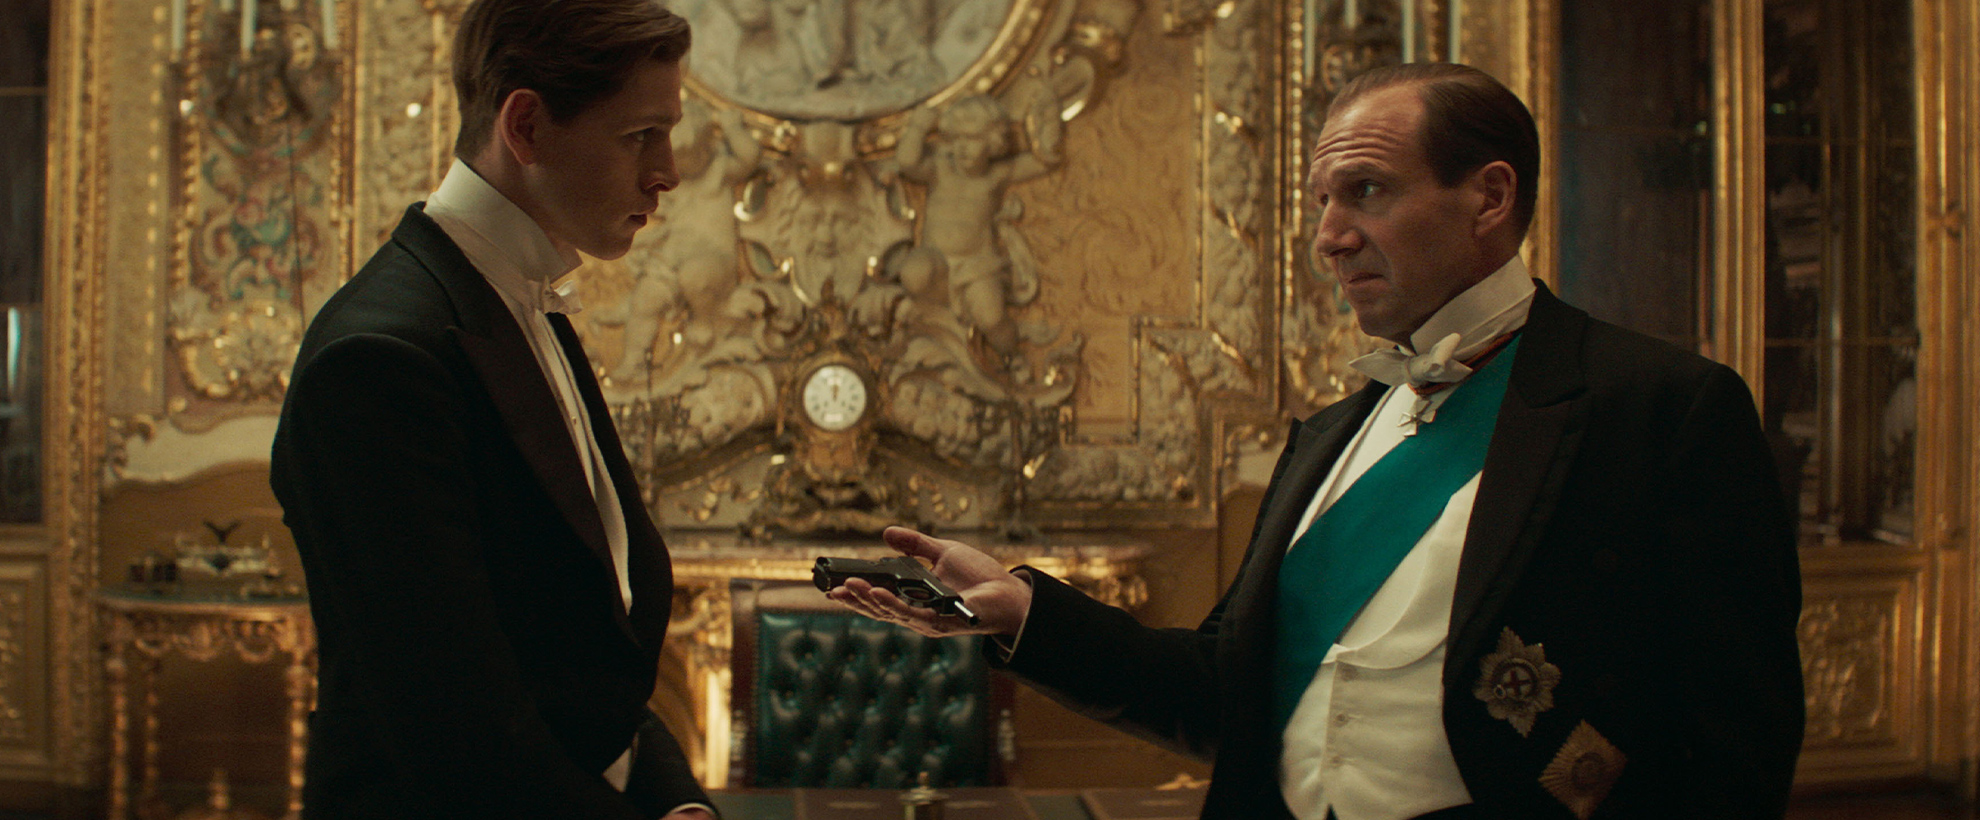 Ralph Finnes hands his son a pistol, in an opulent setting, dressed in formal best